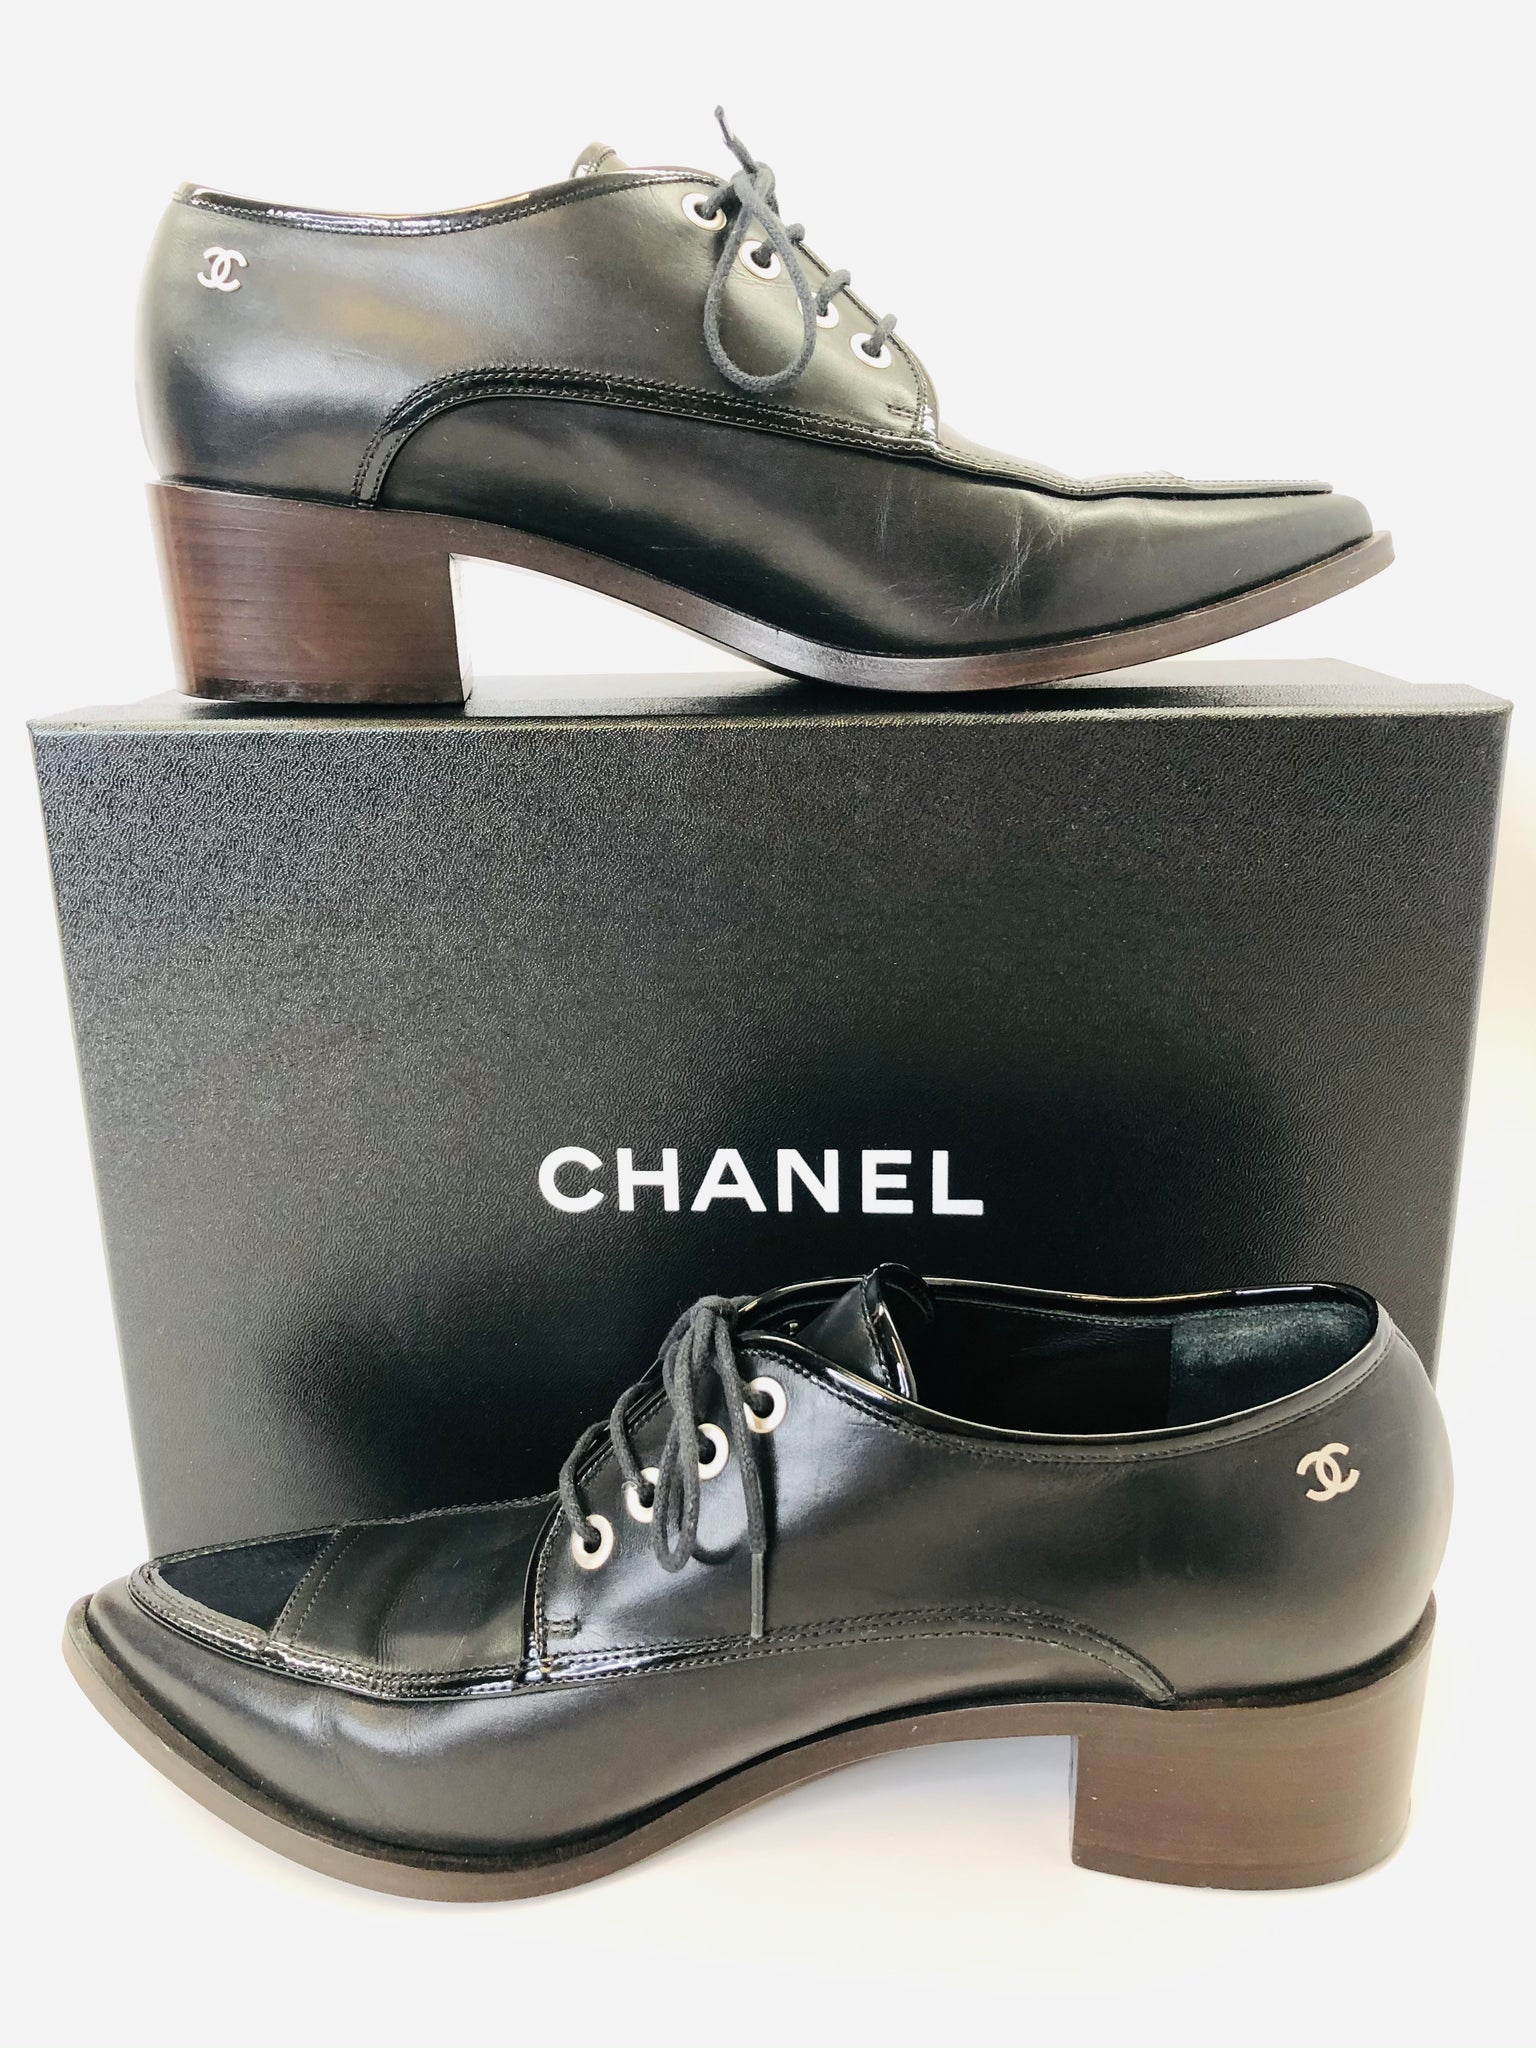 CHANEL, Shoes, Chanel Suede Clogs